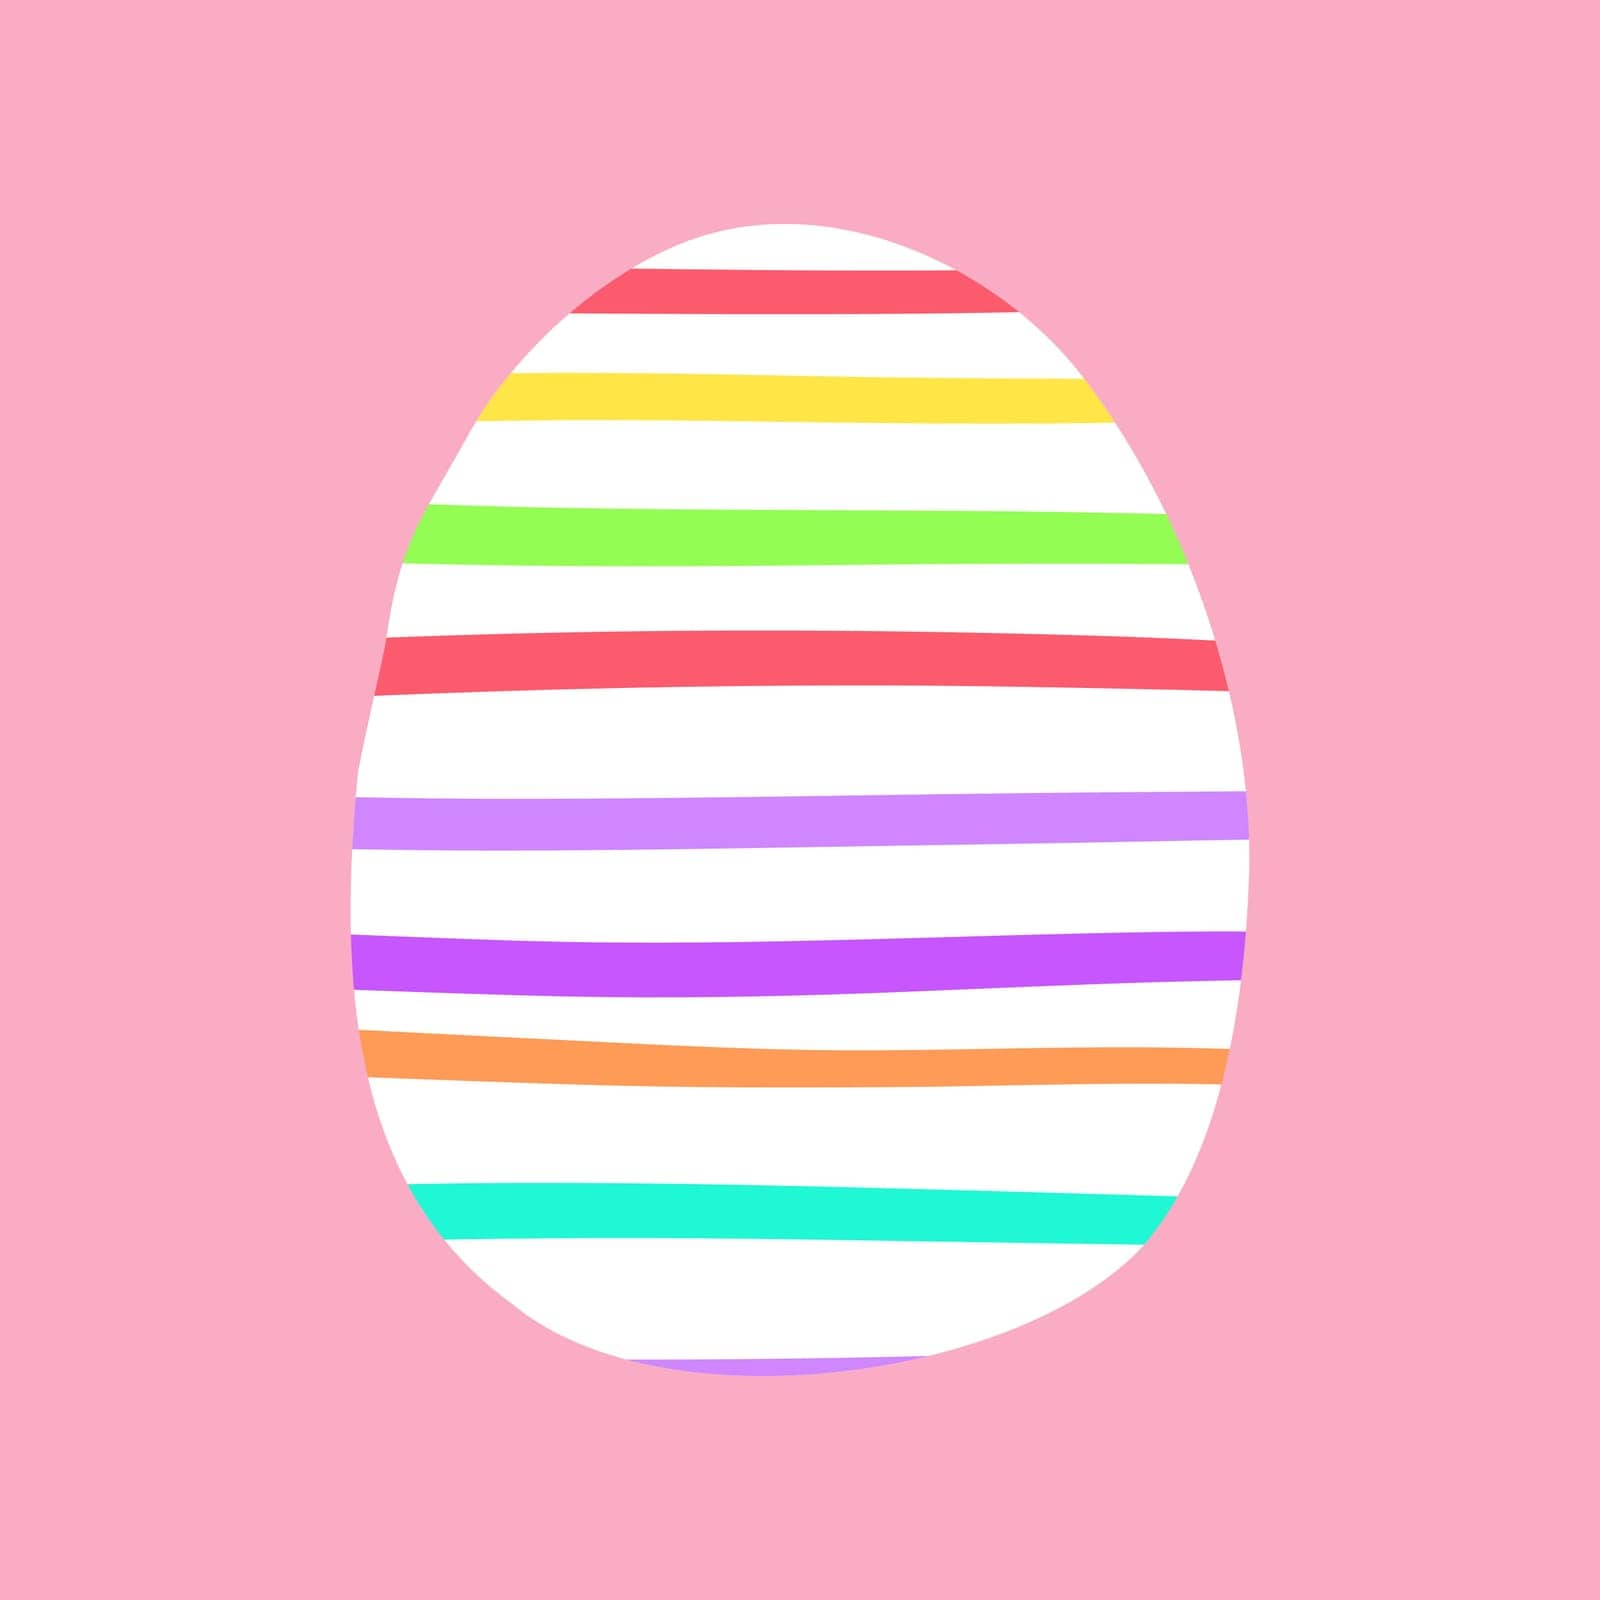 Happy Easter set of cards, posters or covers in modern minimalistic style eggs. Trendy cute templates for advertising and branding, congratulations or invitations